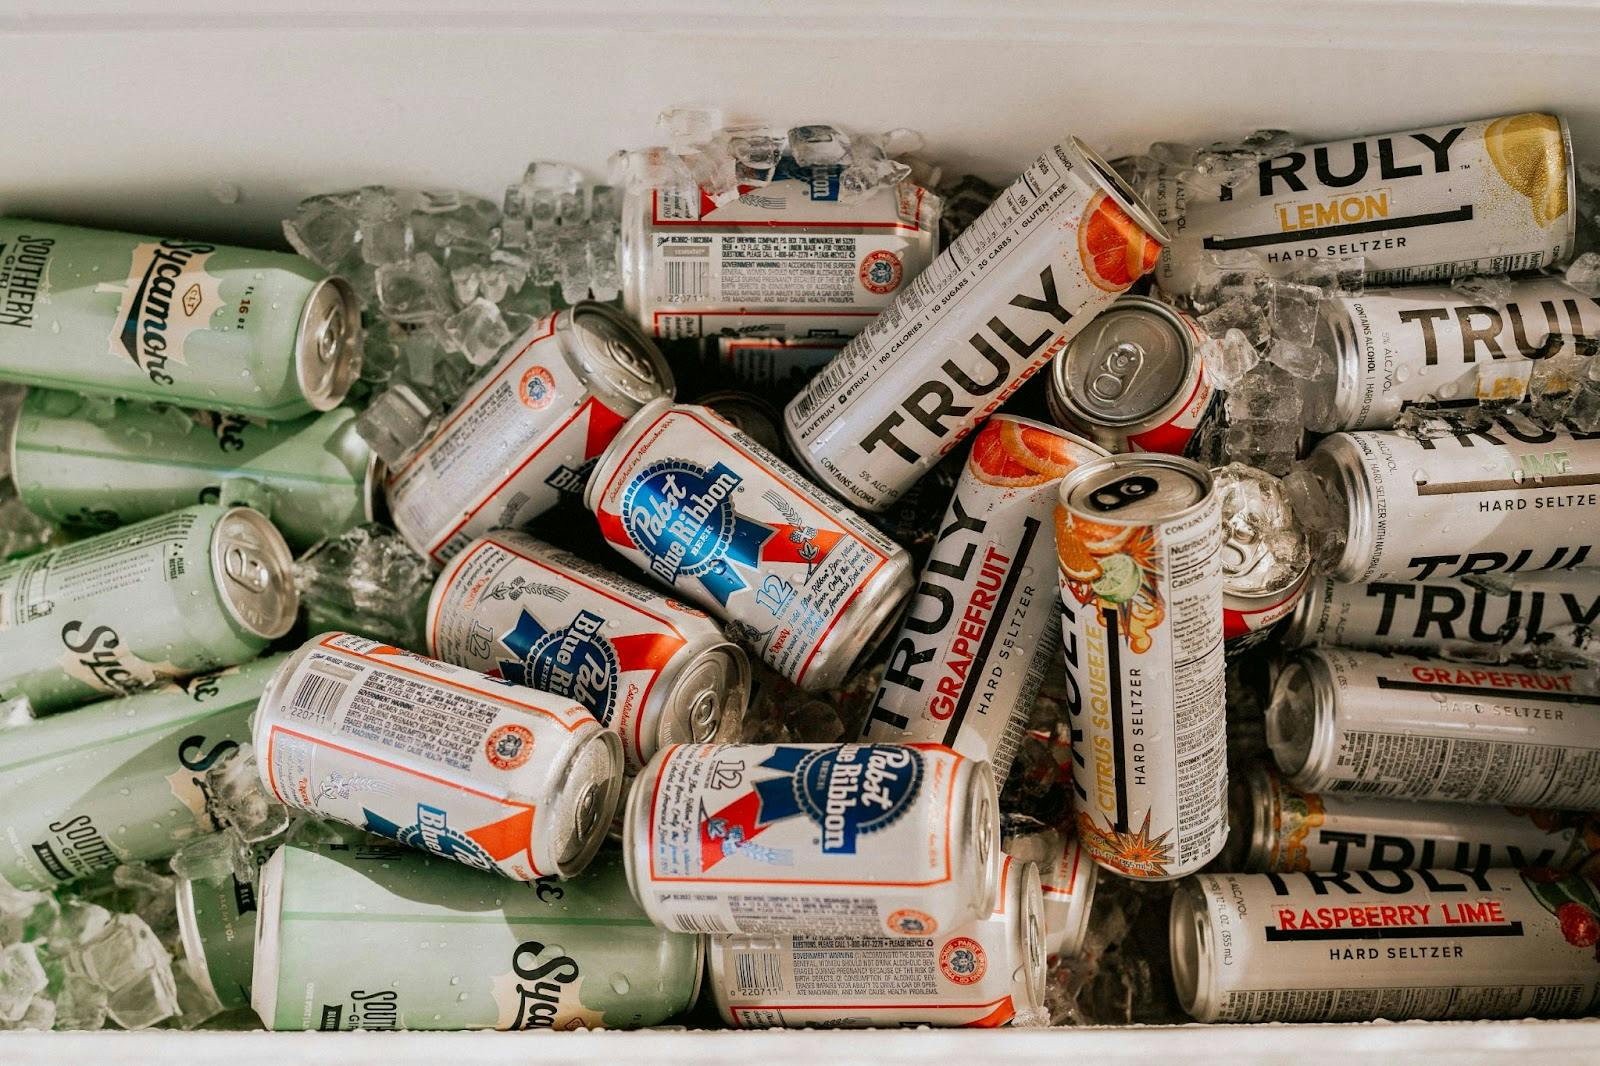 Image of a cooler box filled with canned drinks and ice